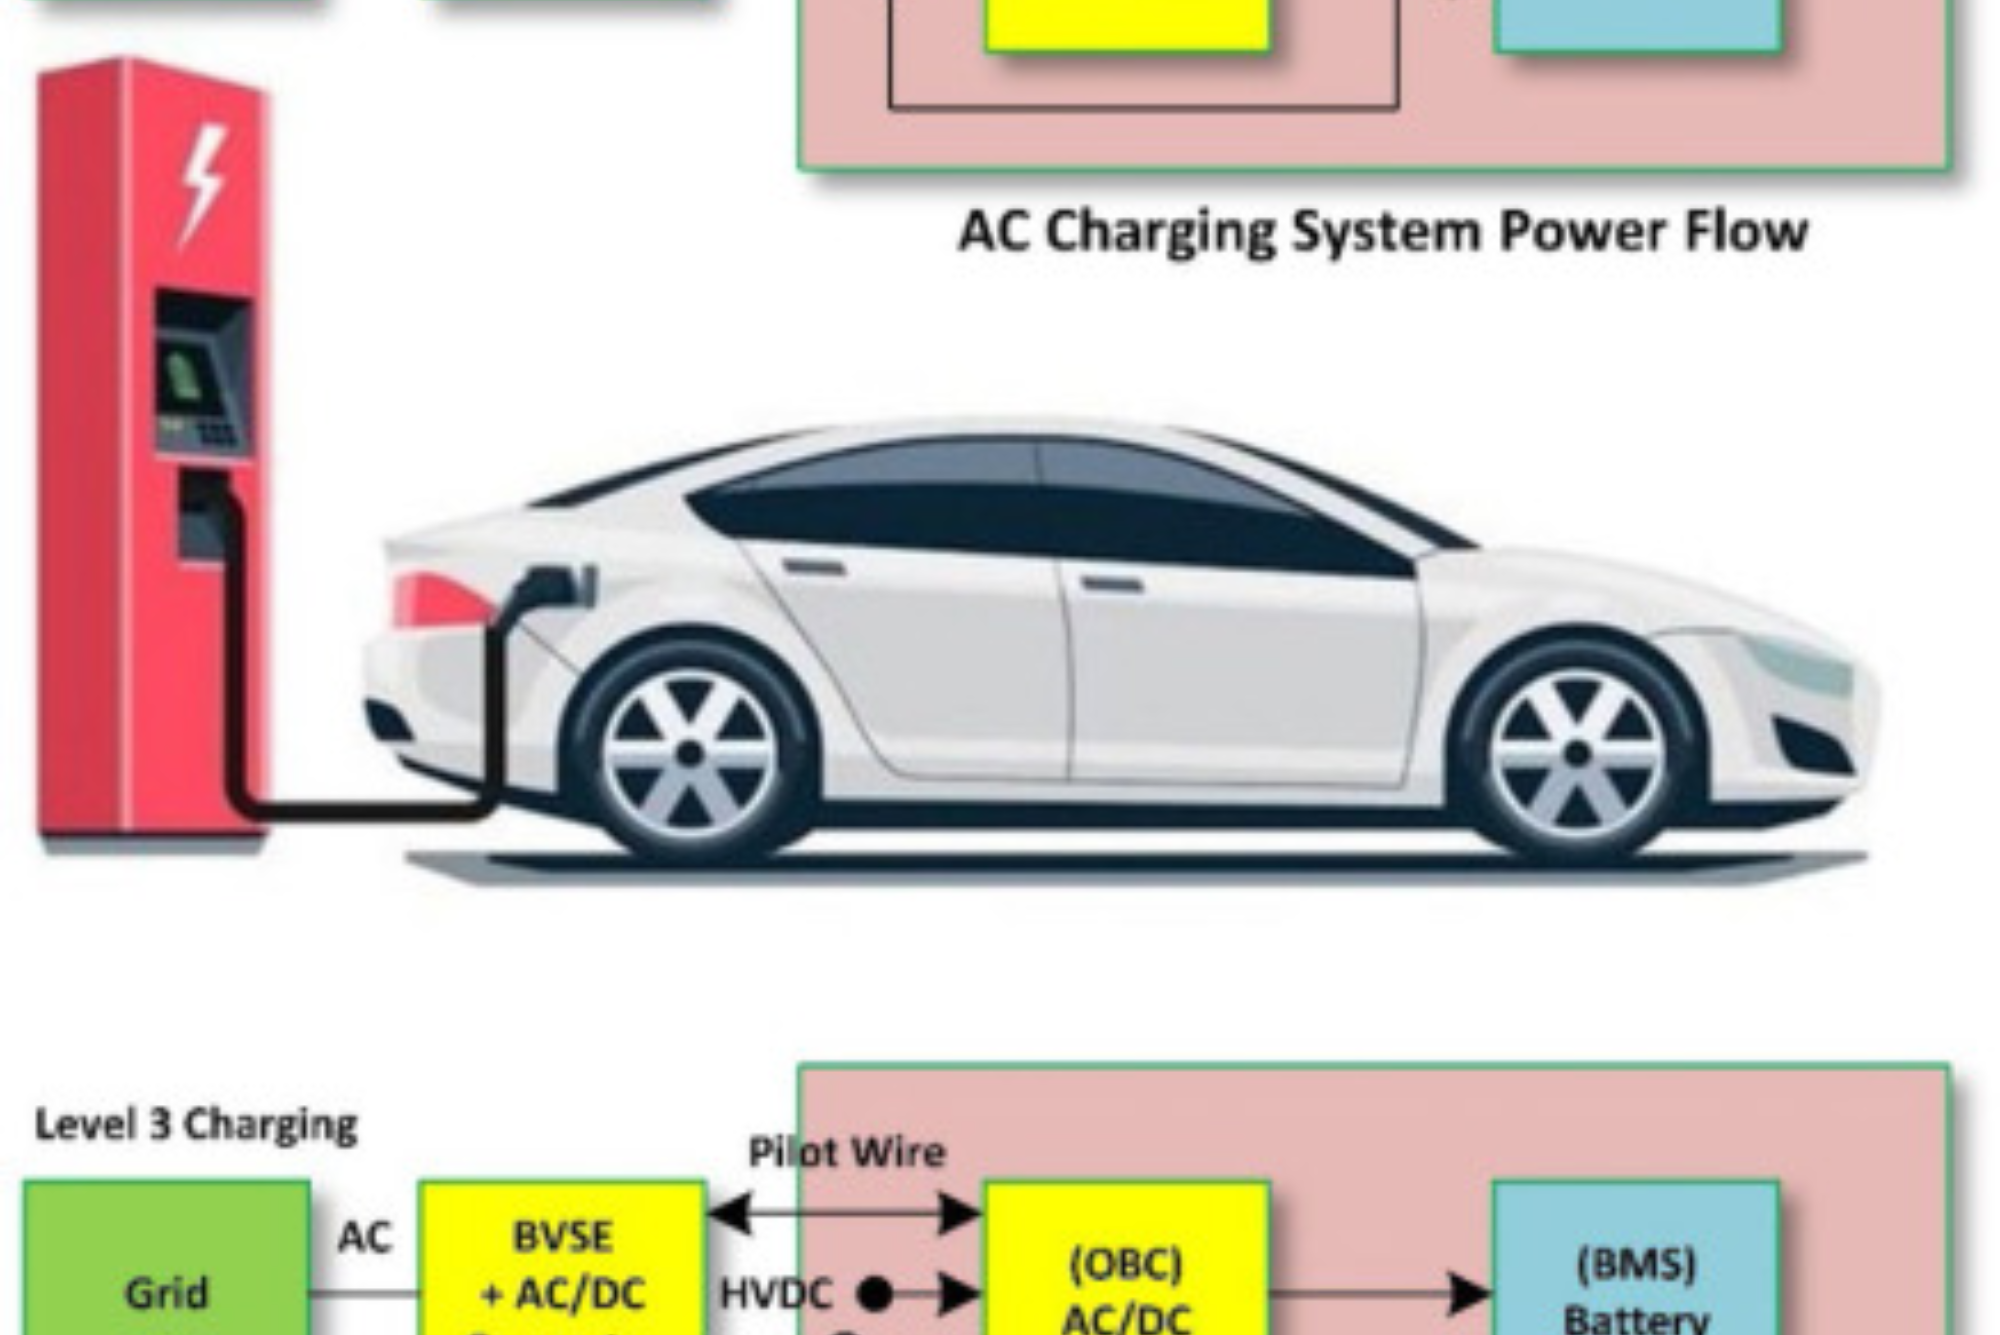 Analysis of Workplace EV Charging Stations and Their Effectiveness